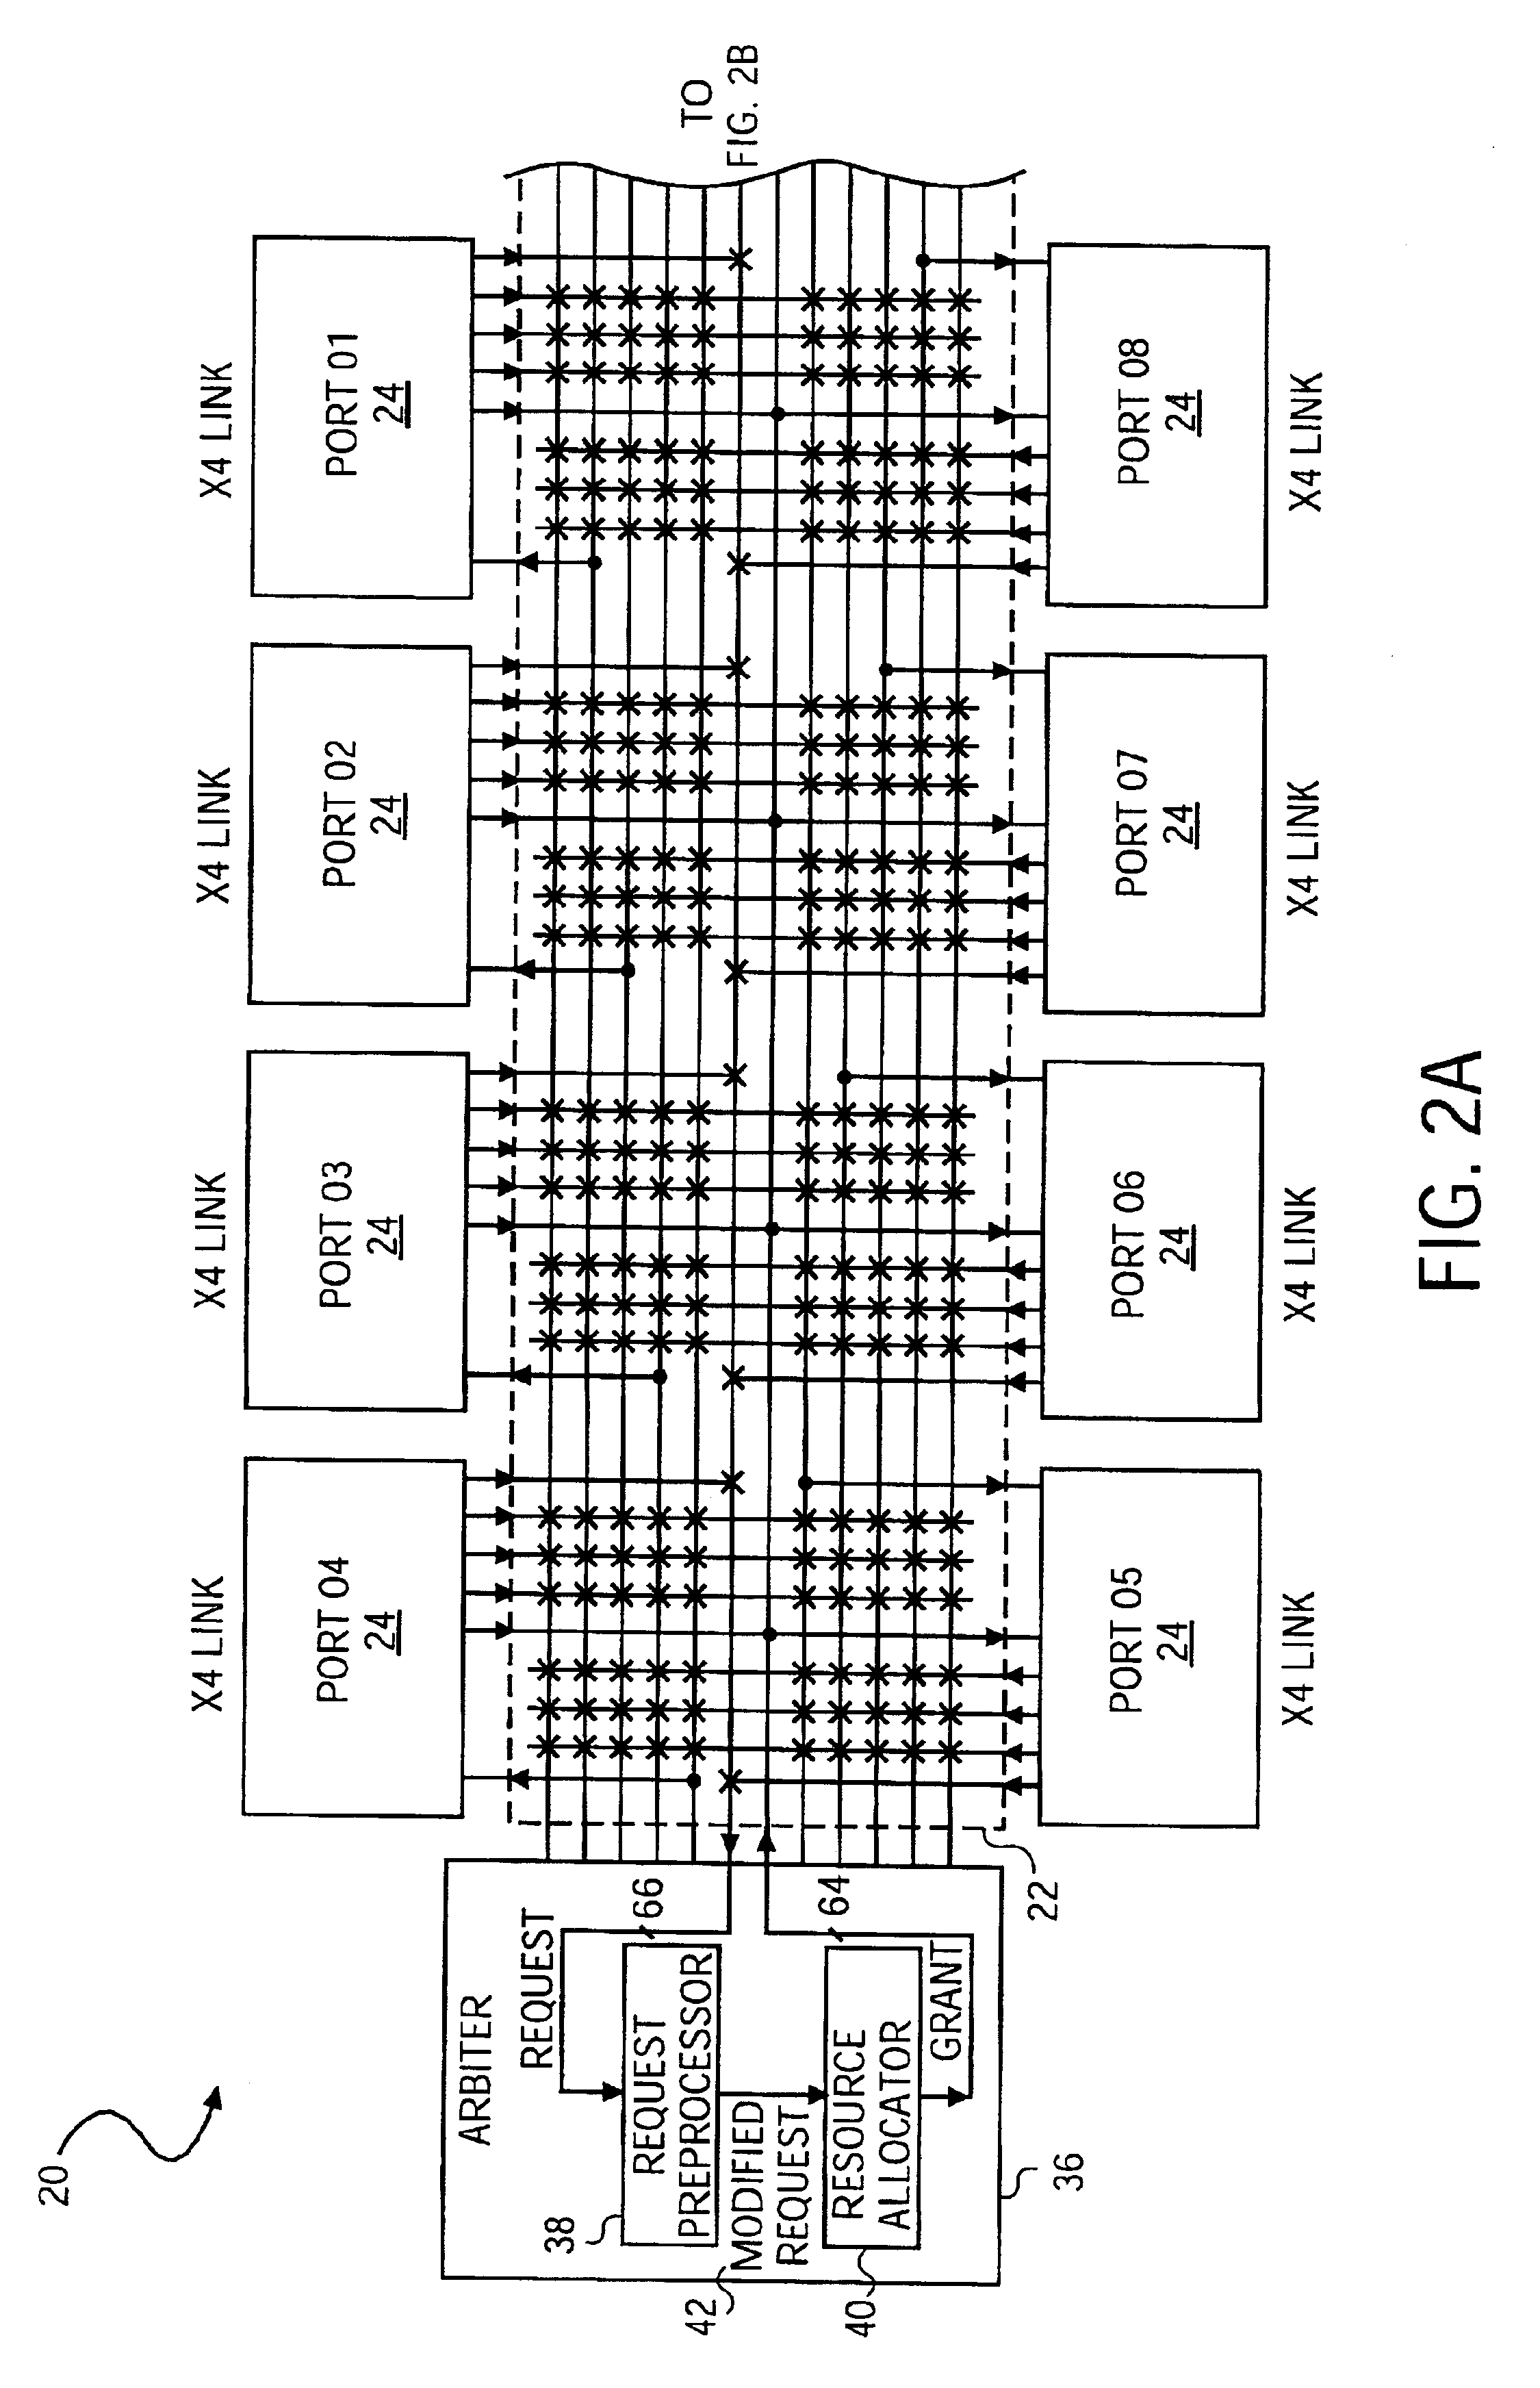 Speculative loading of buffers within a port of a network device